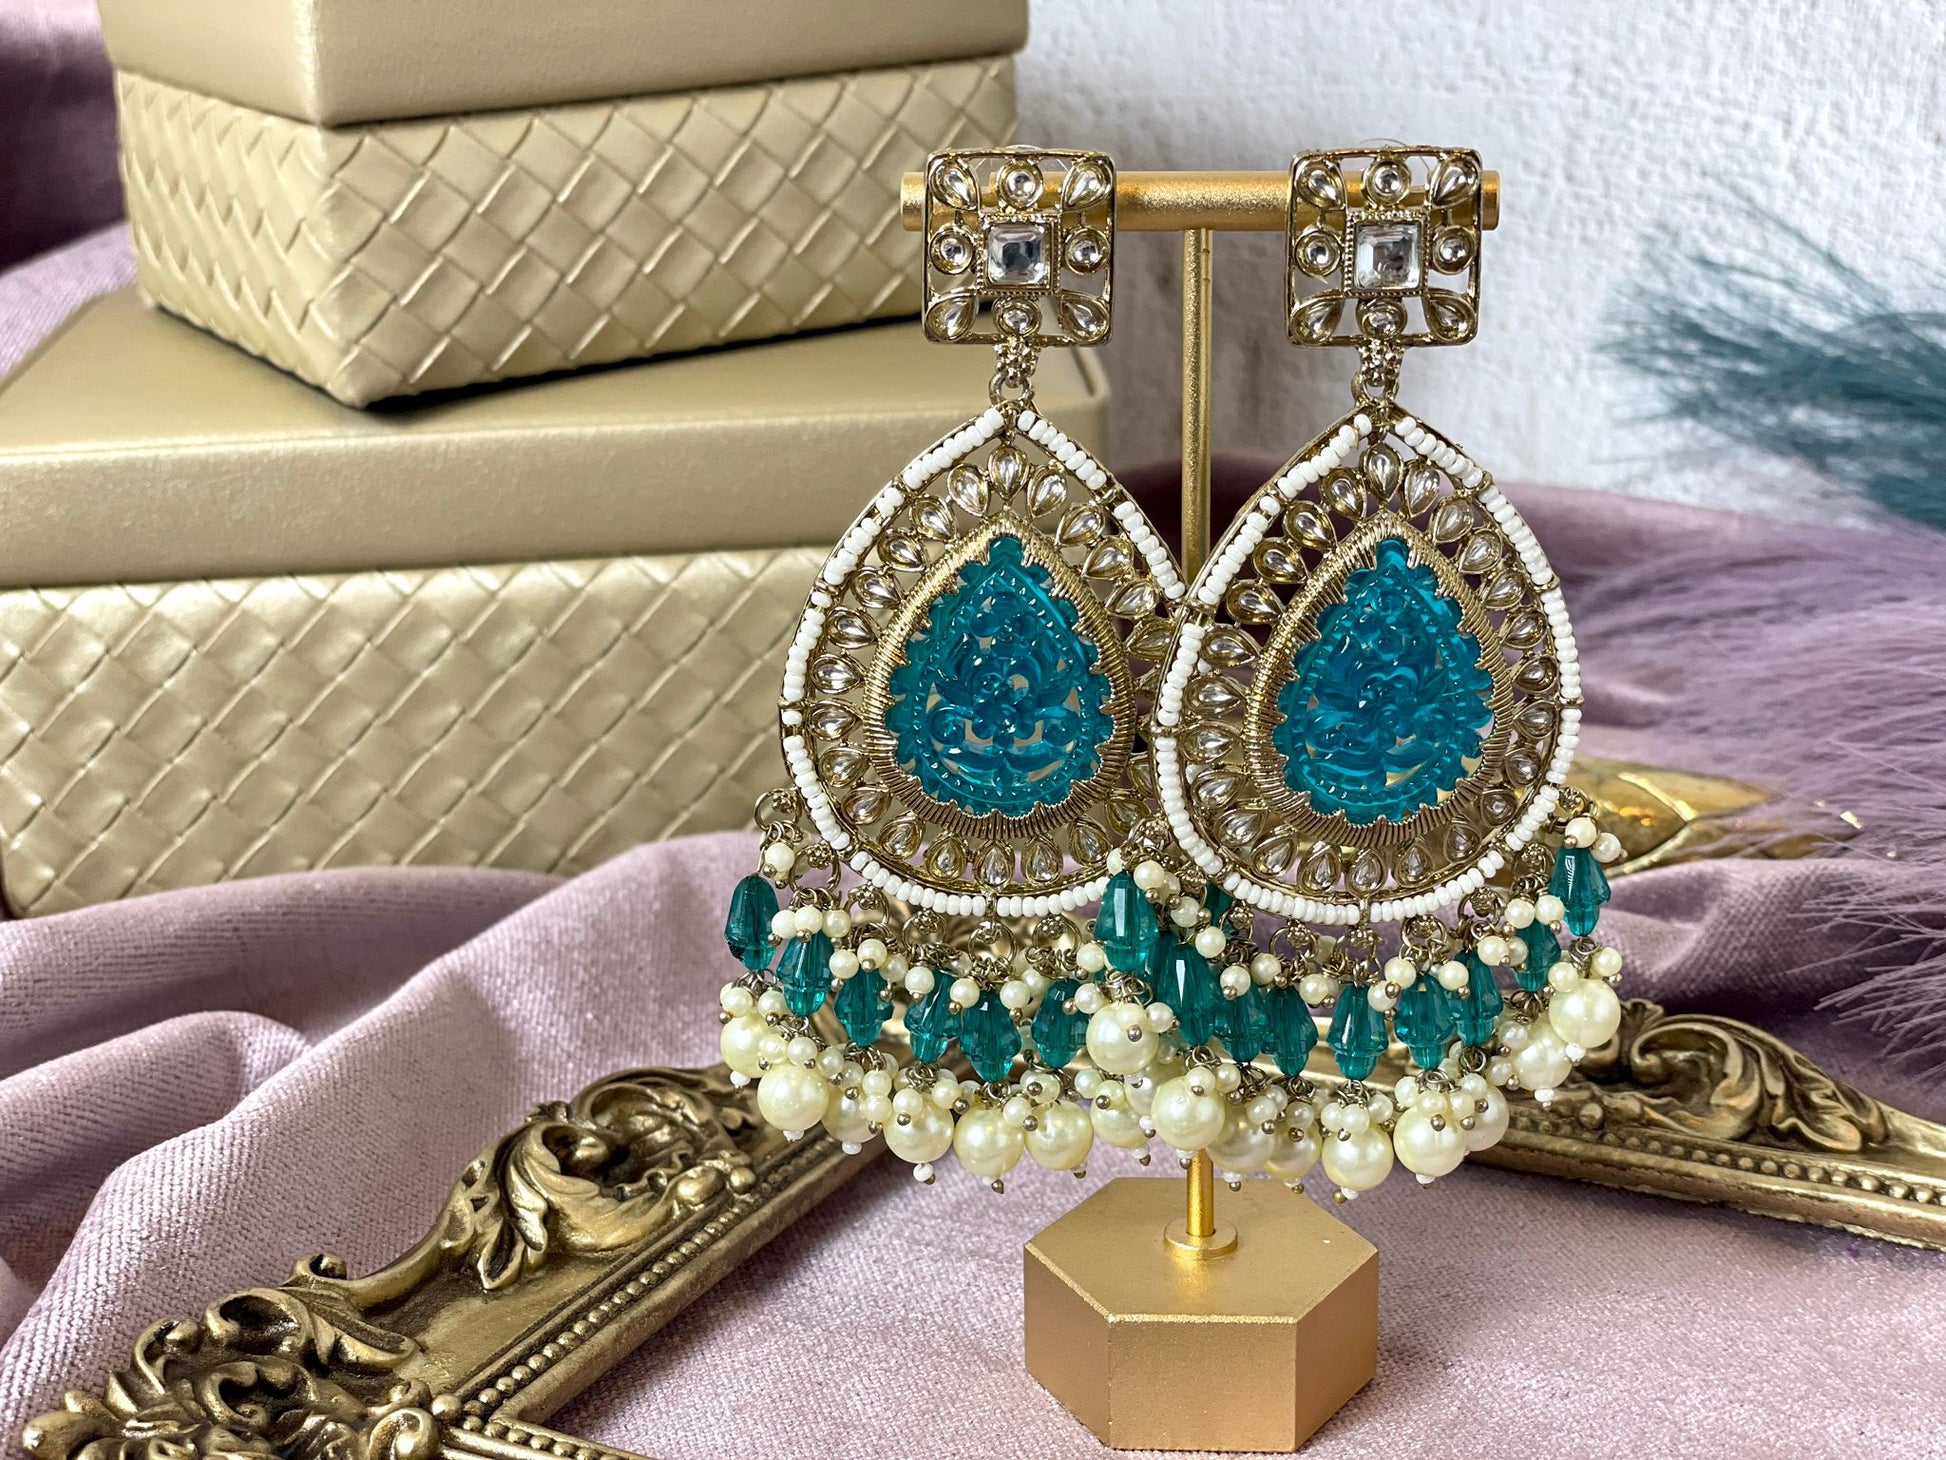 Teal Blue Statement Earrings - Vibrant Fashion Accent for a Chic Look